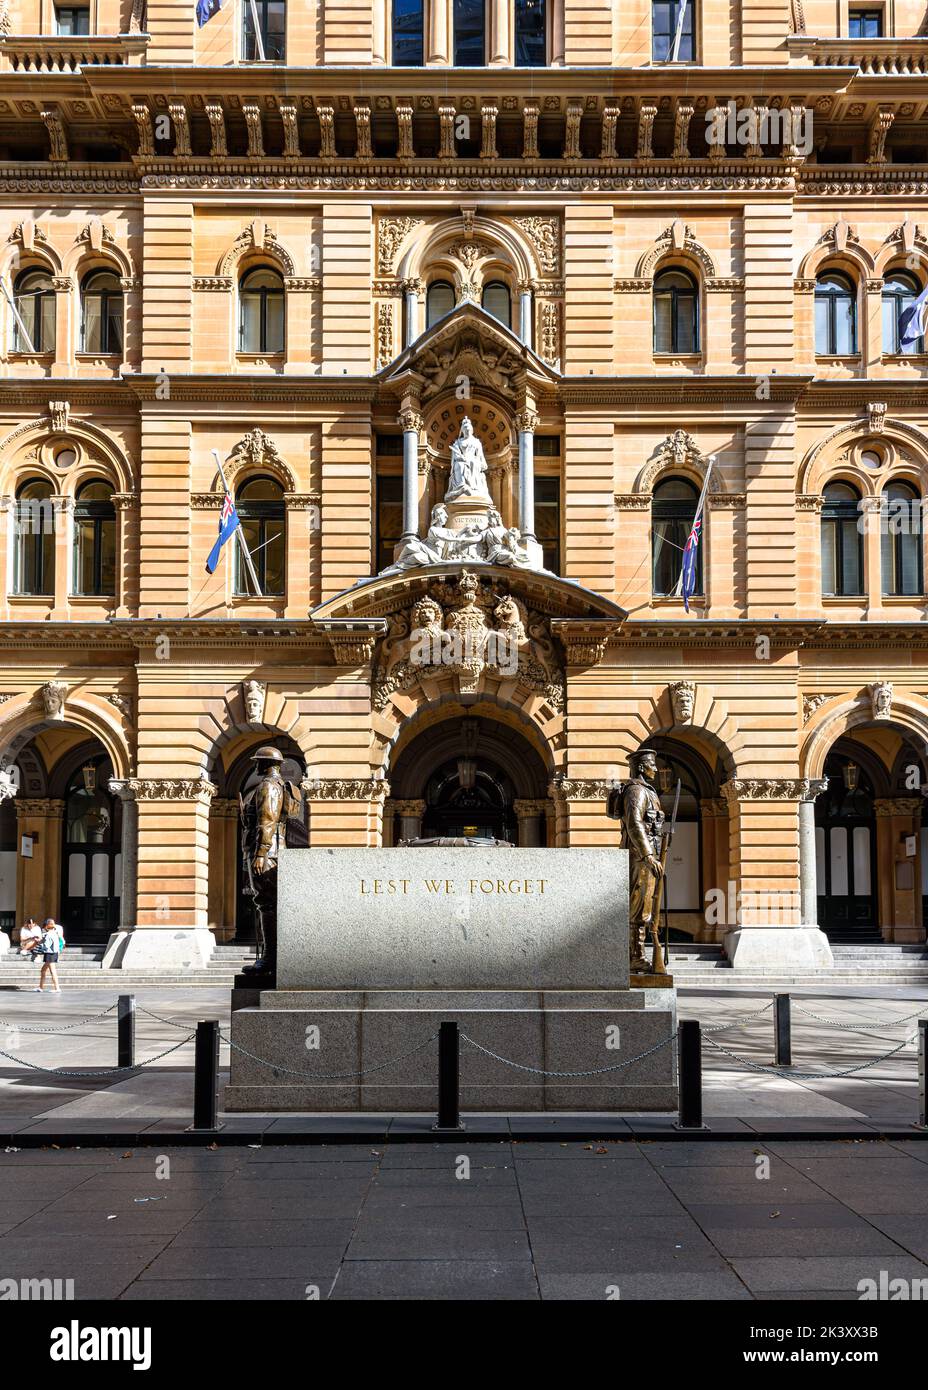 The war memorial cenotaph at Martin Place in Sydney, Australia Stock Photo